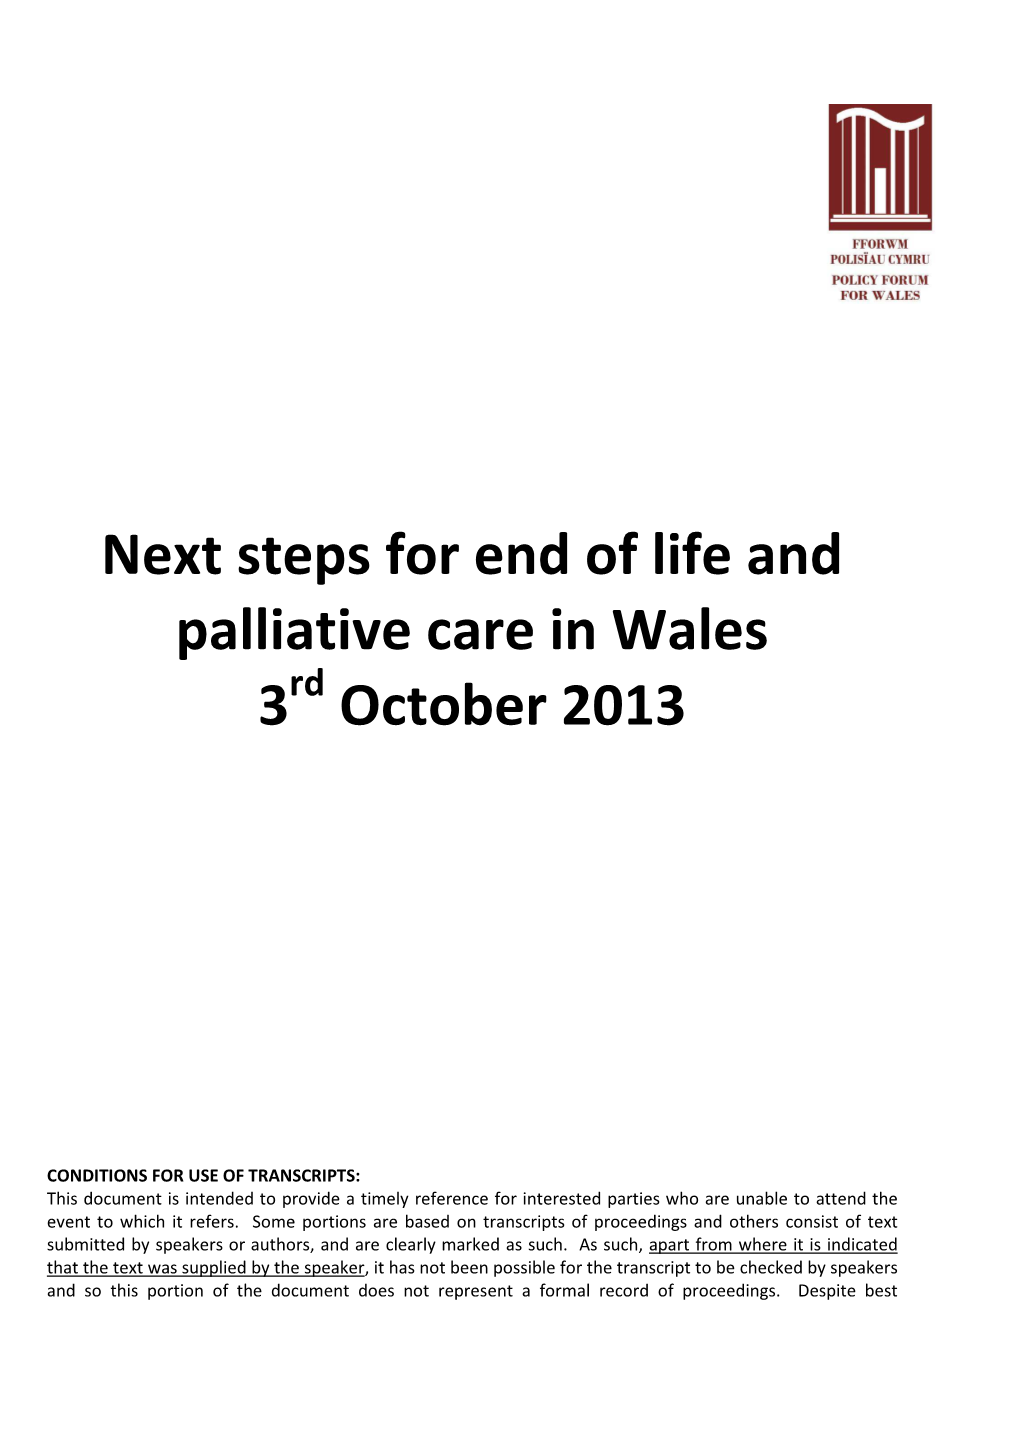 Next Steps for End of Life and Palliative Care in Wales 3 October 2013